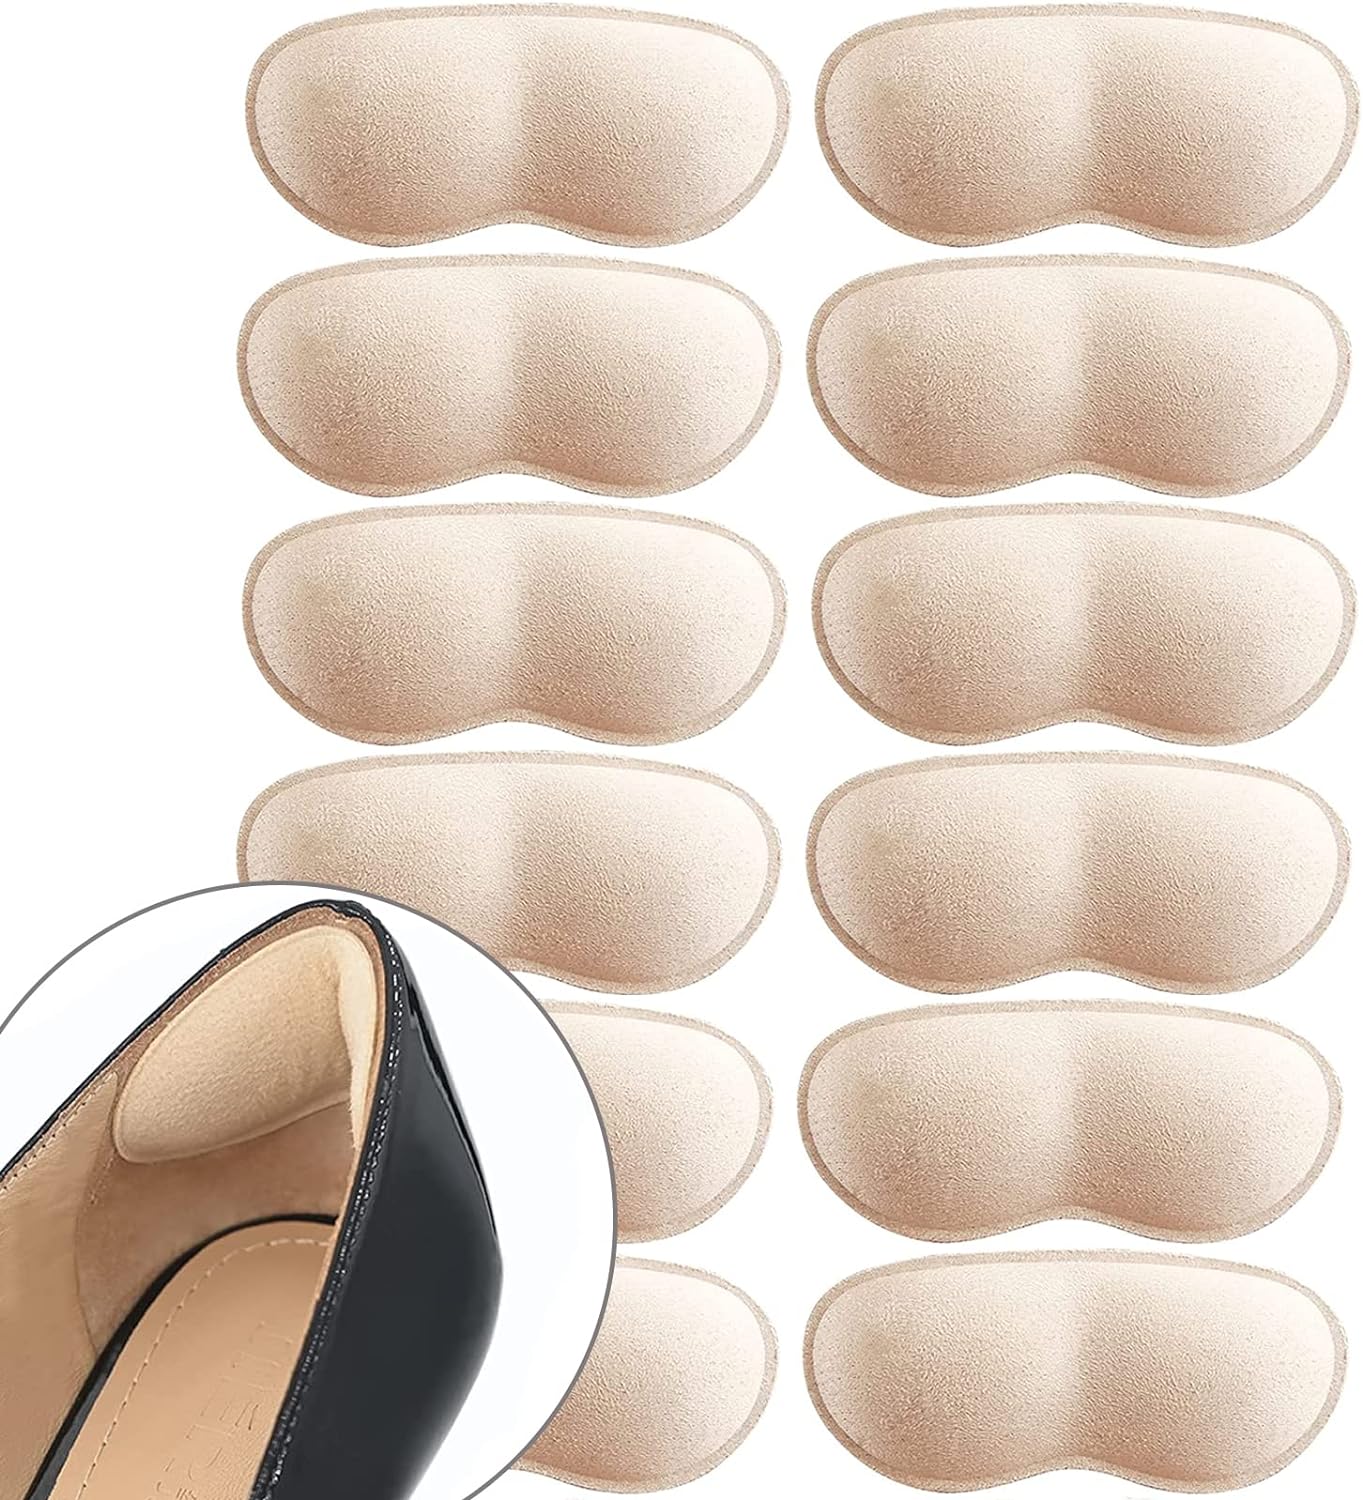 Heel Cushion Pads for Men and Women| Soft Shoe Inserts| Heel Cushion Inserts| Self-Adhesive| Foot Care Protectors| Grips Liners Loose Shoes| Heel Pain Relief| Bunion Callus| Blisters(Beige)